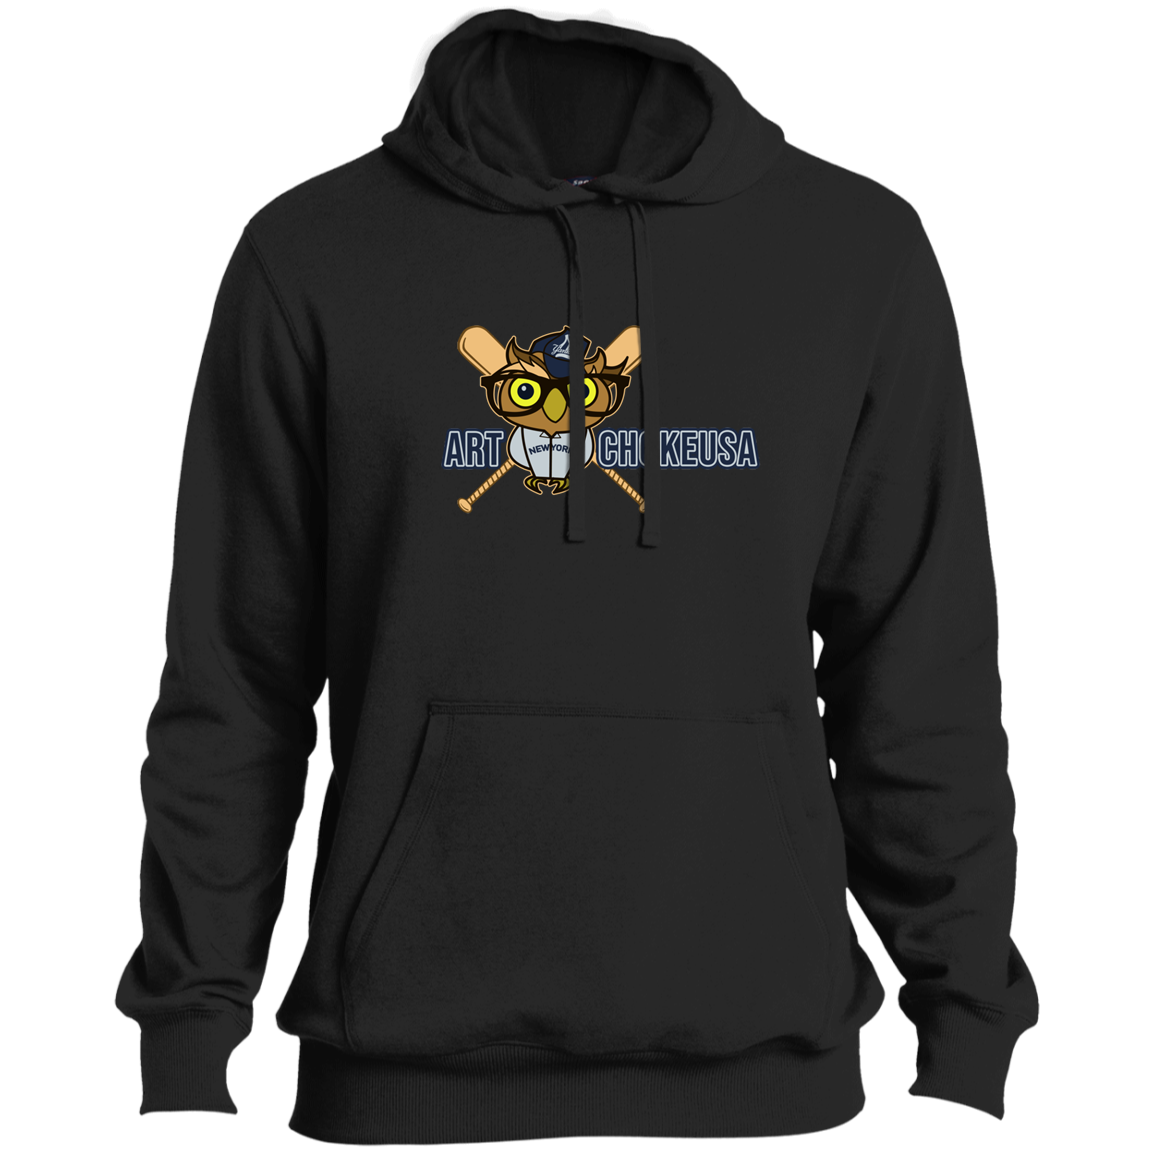 ArtichokeUSA Character and Font design. New York Owl. NY Yankees Fan Art. Let's Create Your Own Team Design Today. Tall Pullover Hoodie